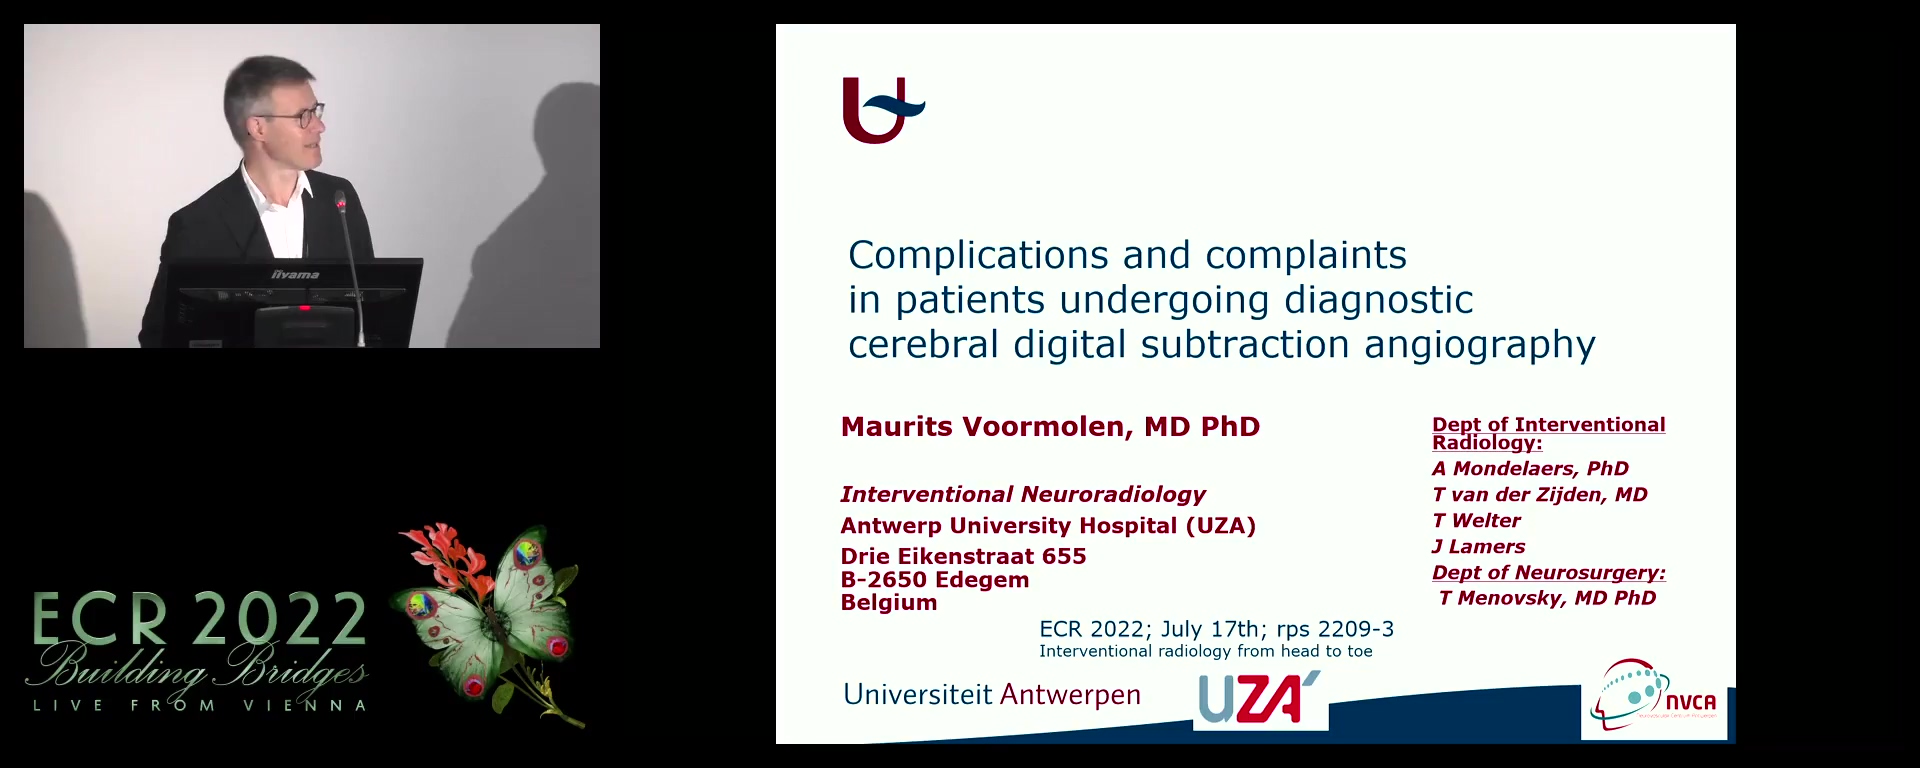 Complications and complaints in patients undergoing diagnostic cerebral digital subtraction angiography